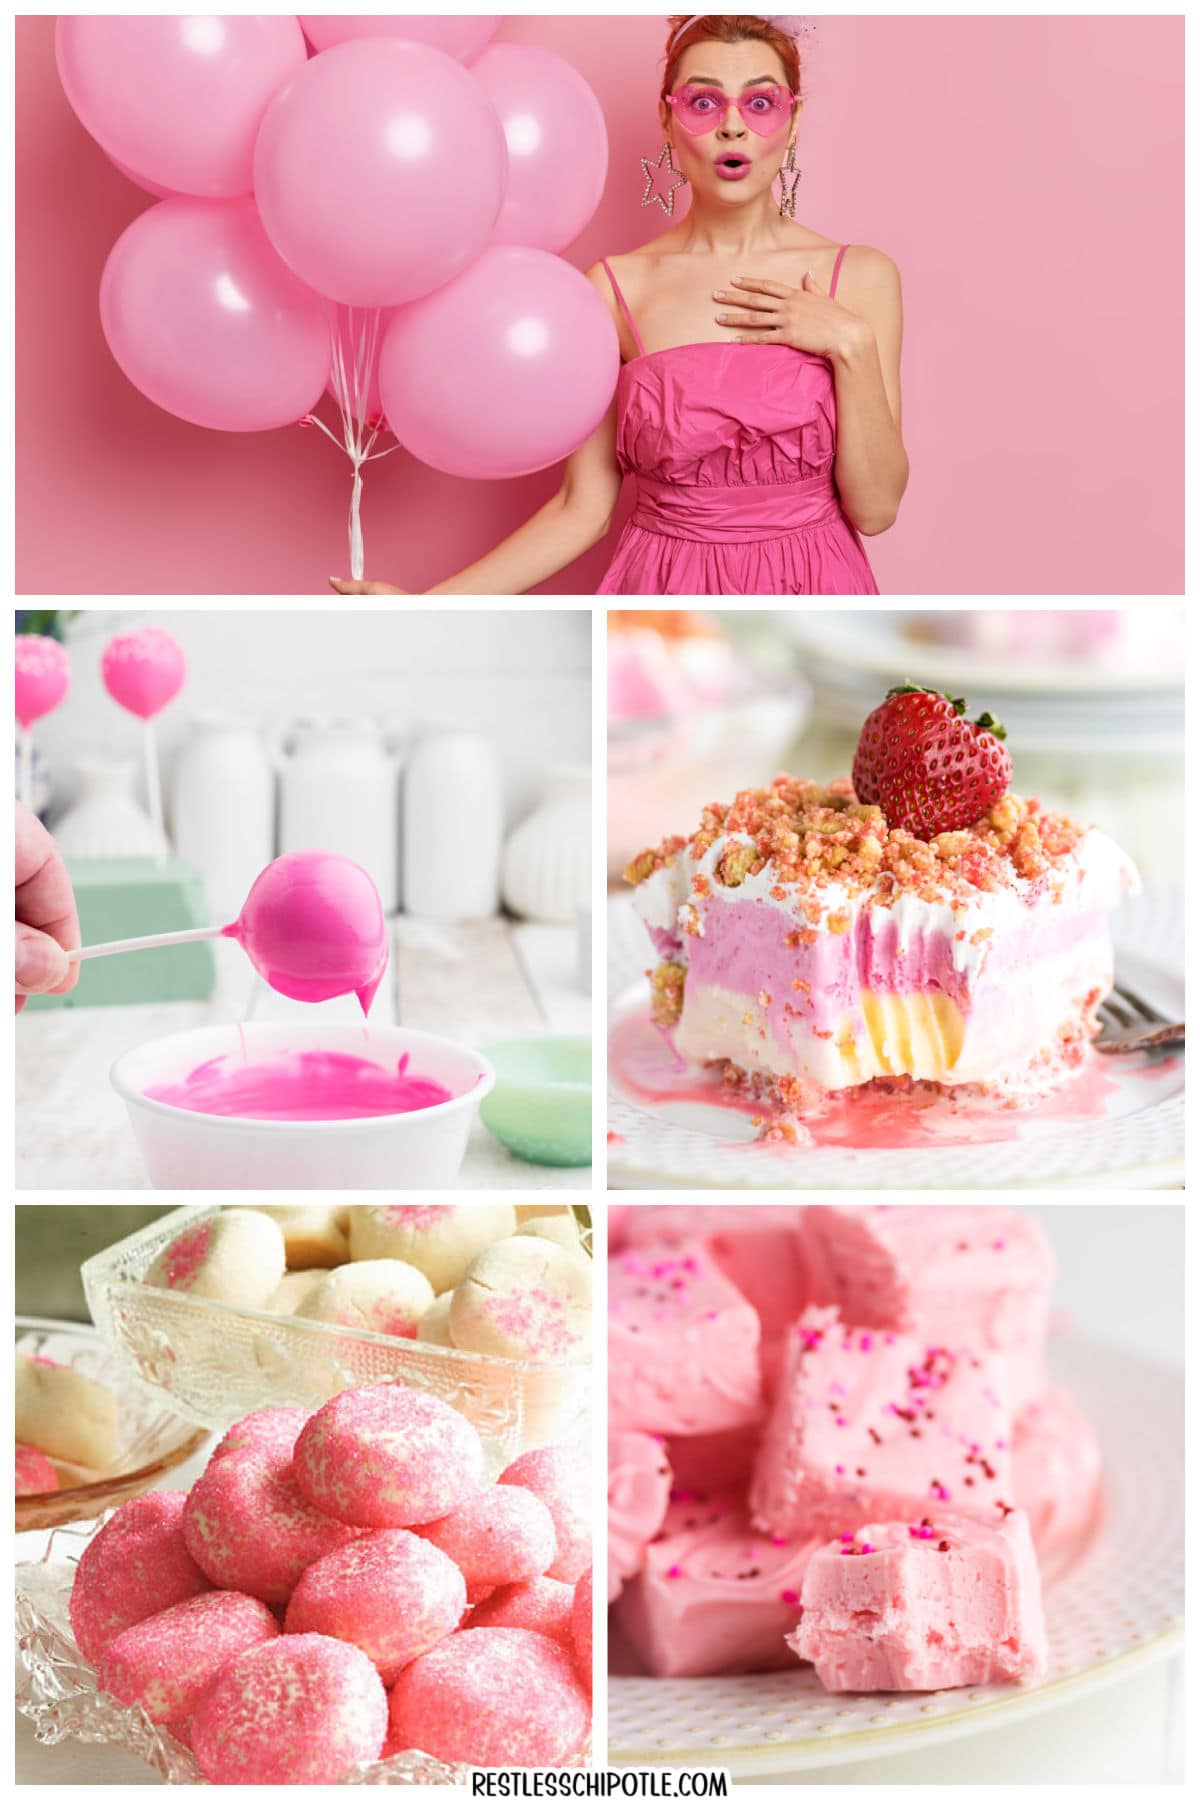 A collage of pink desserts and of a woman holding pink balloons.